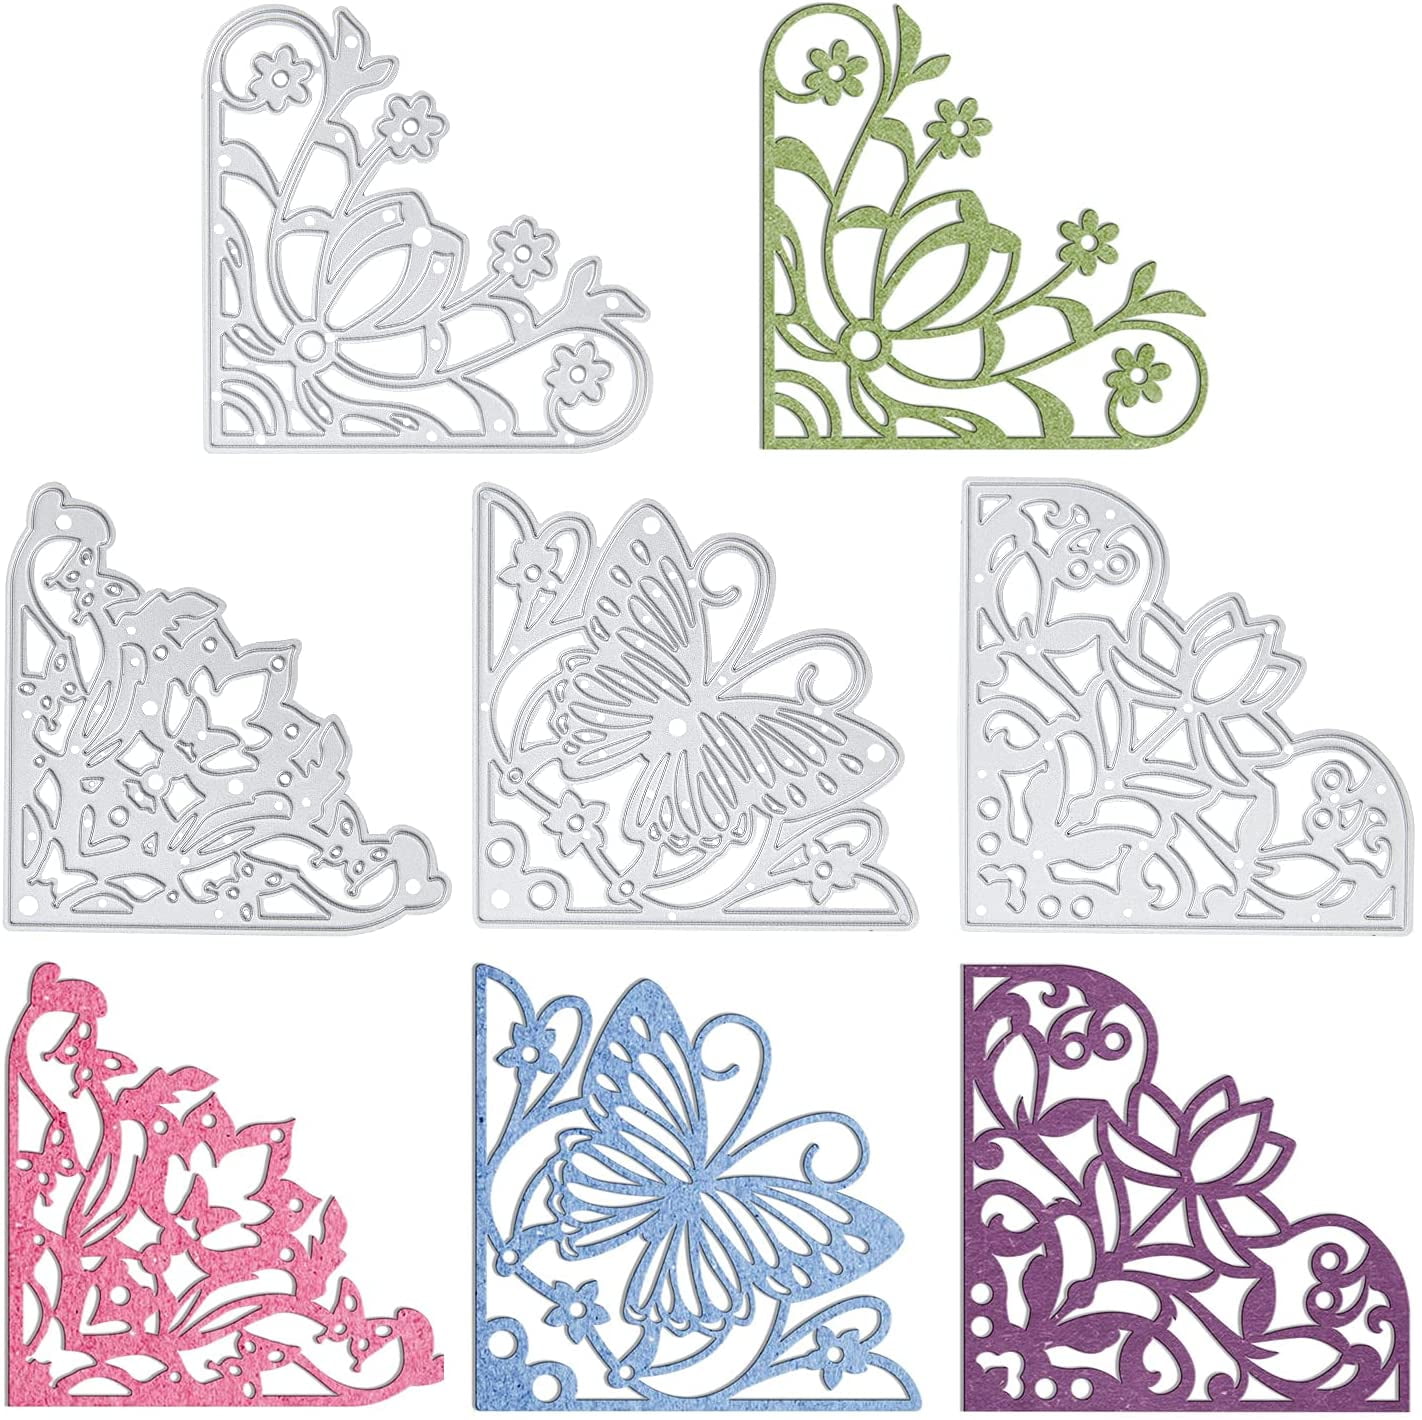 Merry Christmas Lace Metal Cutting Dies Stencils Scrapbooking Card Making 